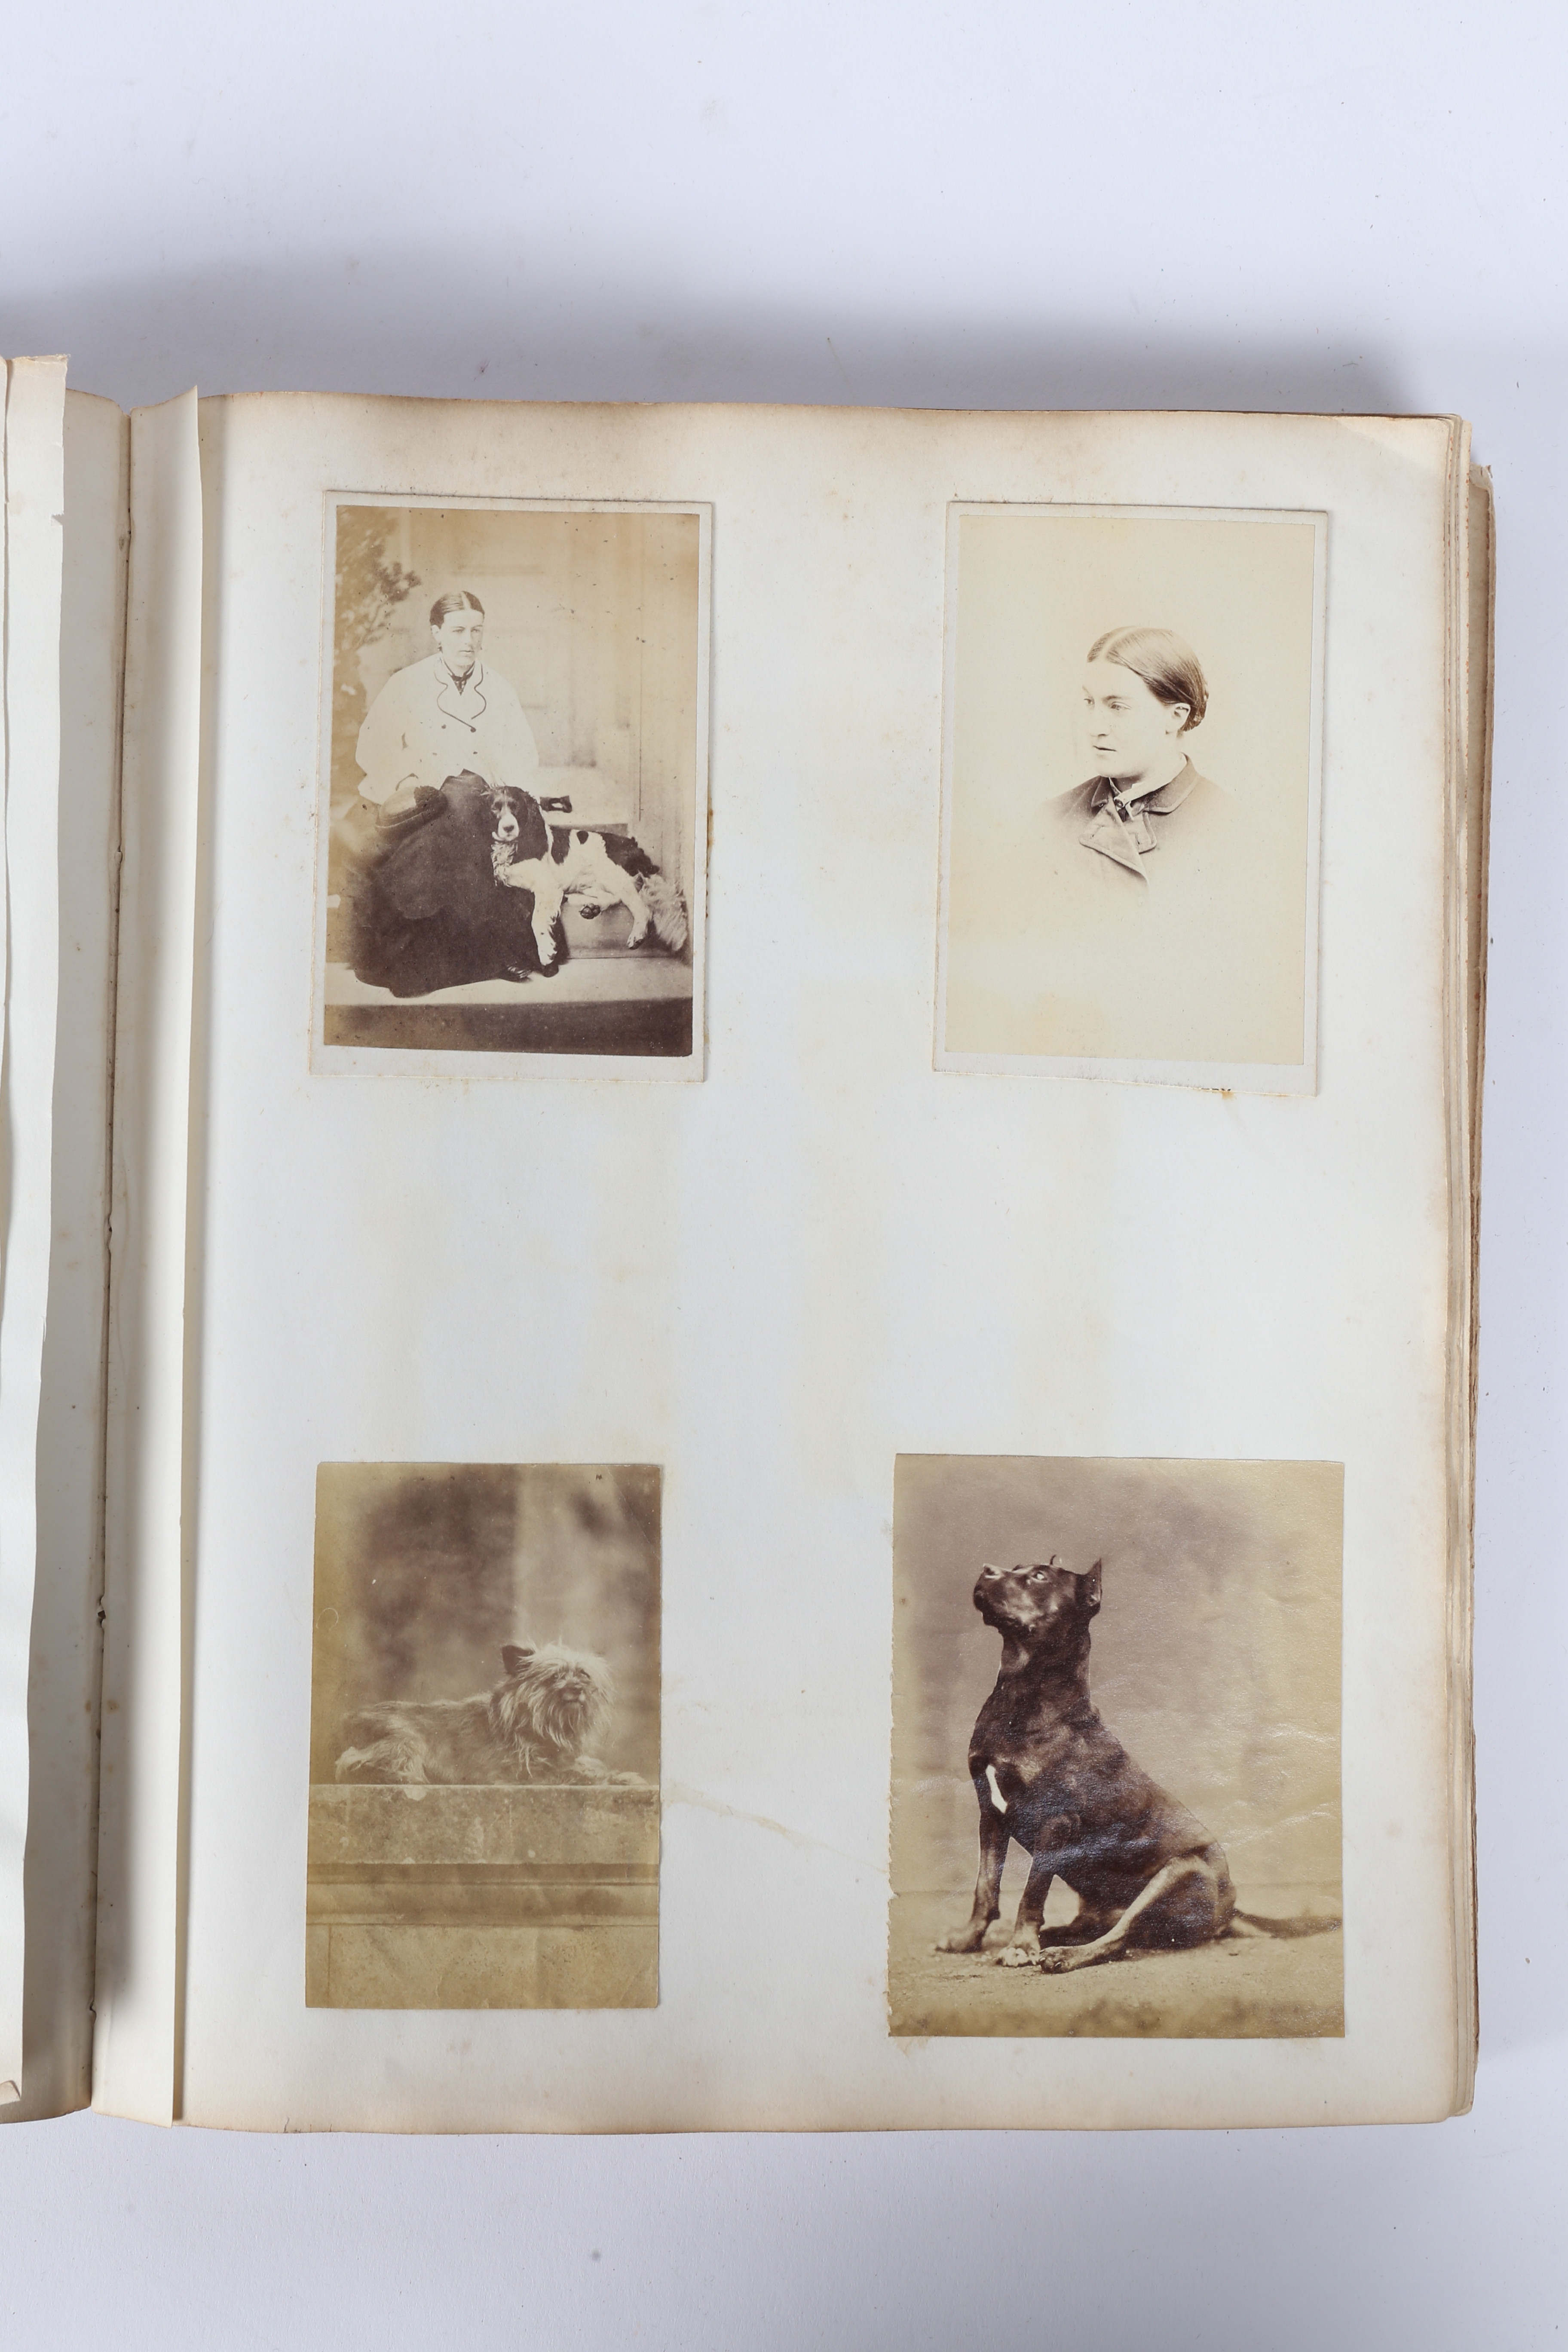 VICTORIAN PHOTOGRAPH ALBUM BELONGING TO GENERAL SIR HARRY JONES GCB DCL, AND HIS WIFE LADY CHARLOTTE - Image 9 of 60